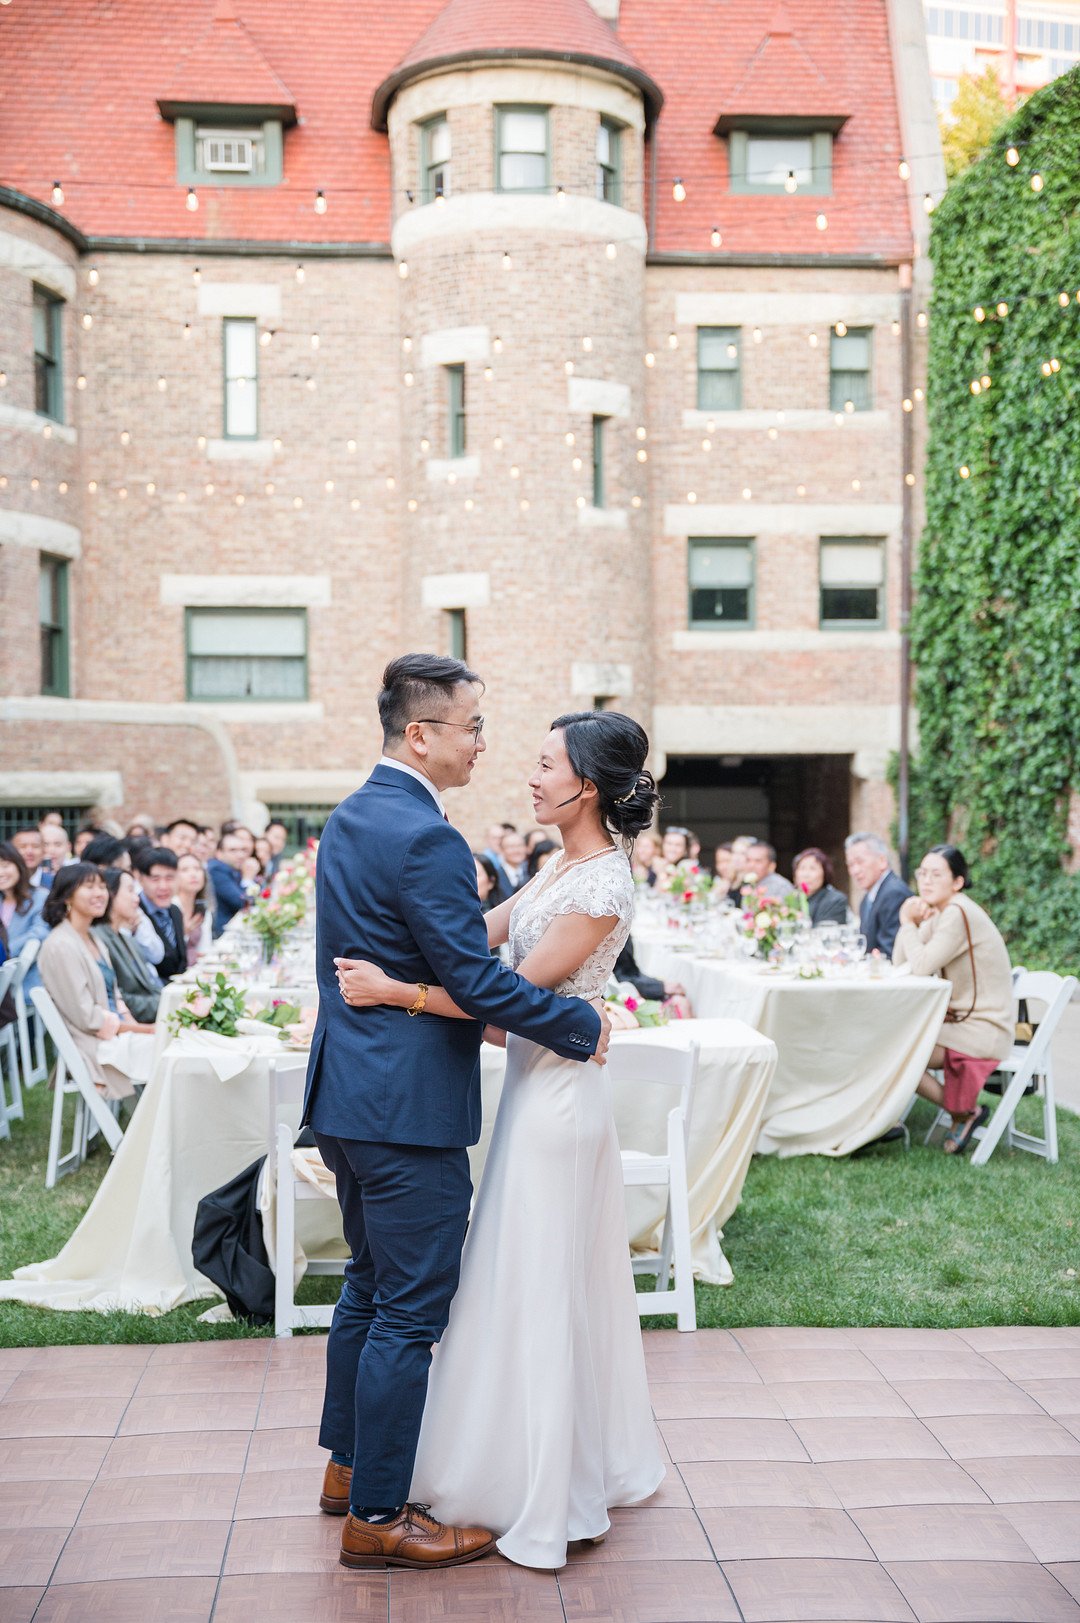 Chan_Chan_Winterlyn Photography_GLESSNER HOUSE CHICAGO WEDDING-121_low.jpg